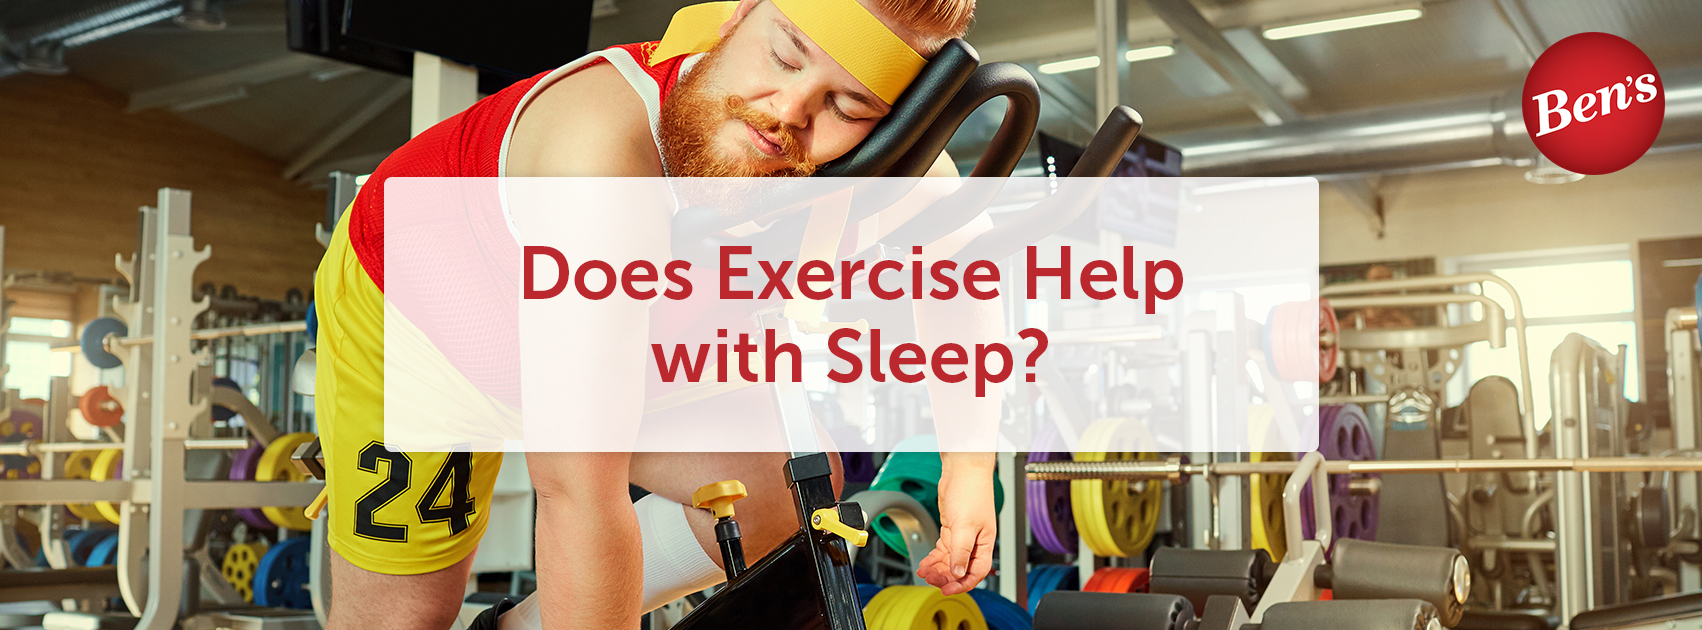 Does Exercise Help with Sleep?